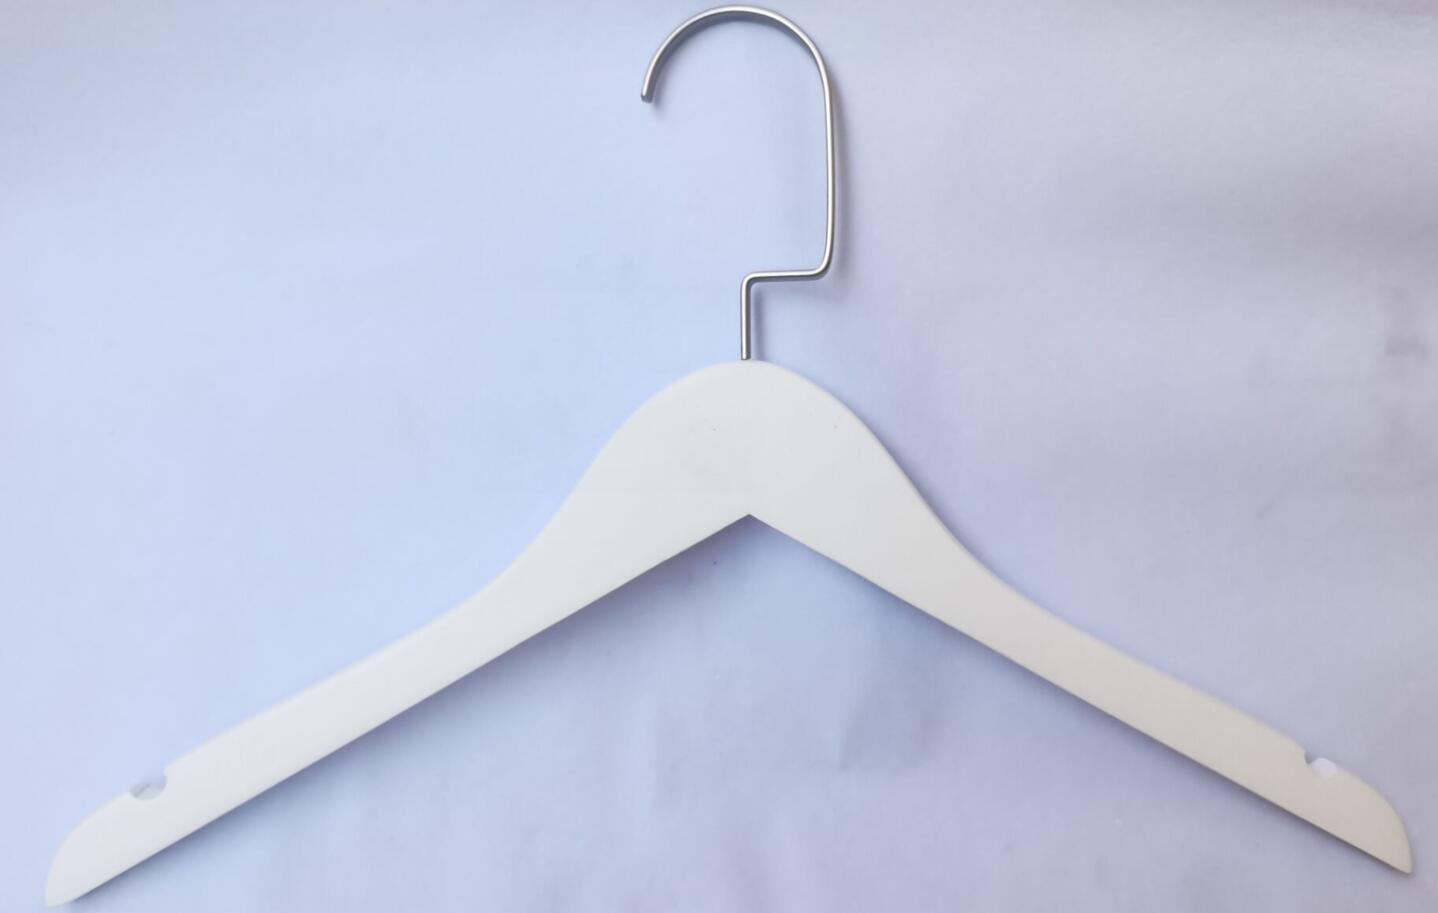 Fashion Store White Wooden Hangers For Man And Woman